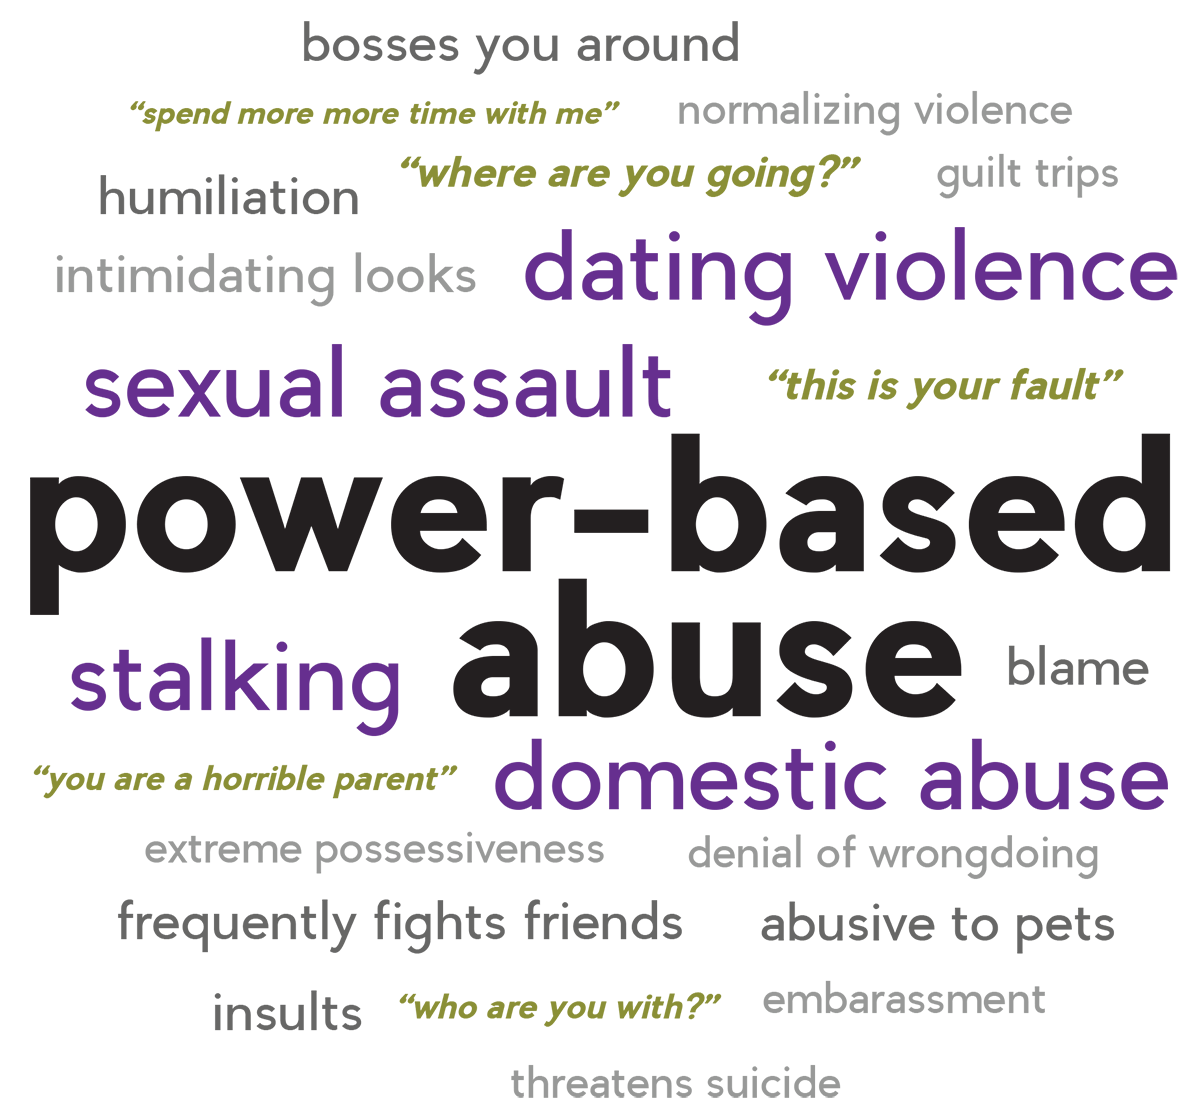 thesis statements about abuse of power